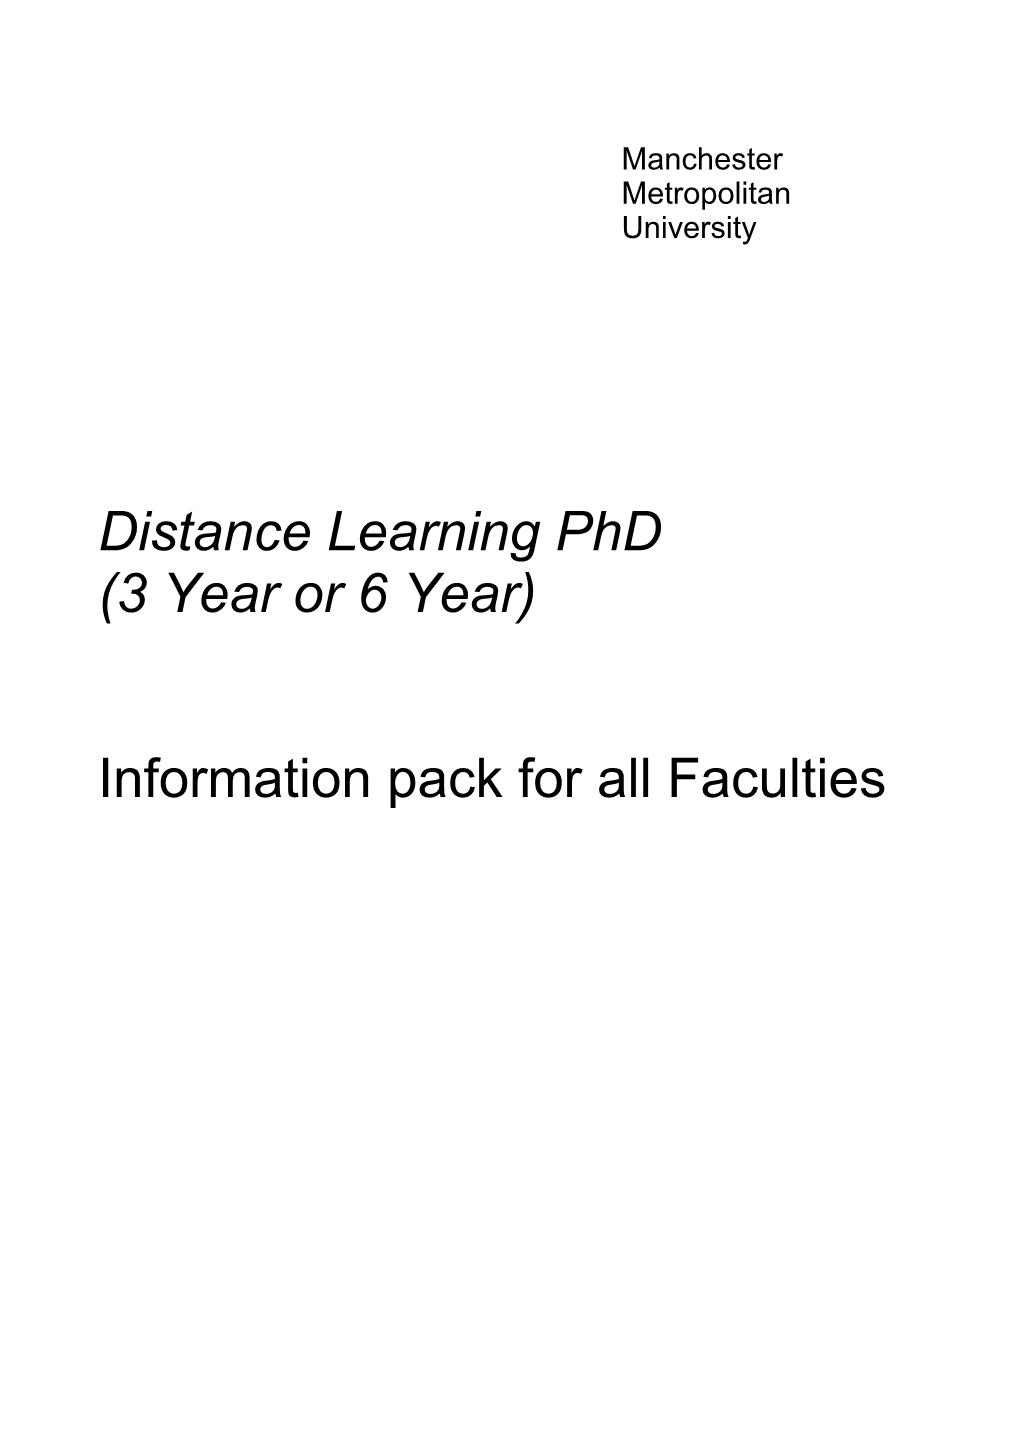 Information Pack for All Faculties